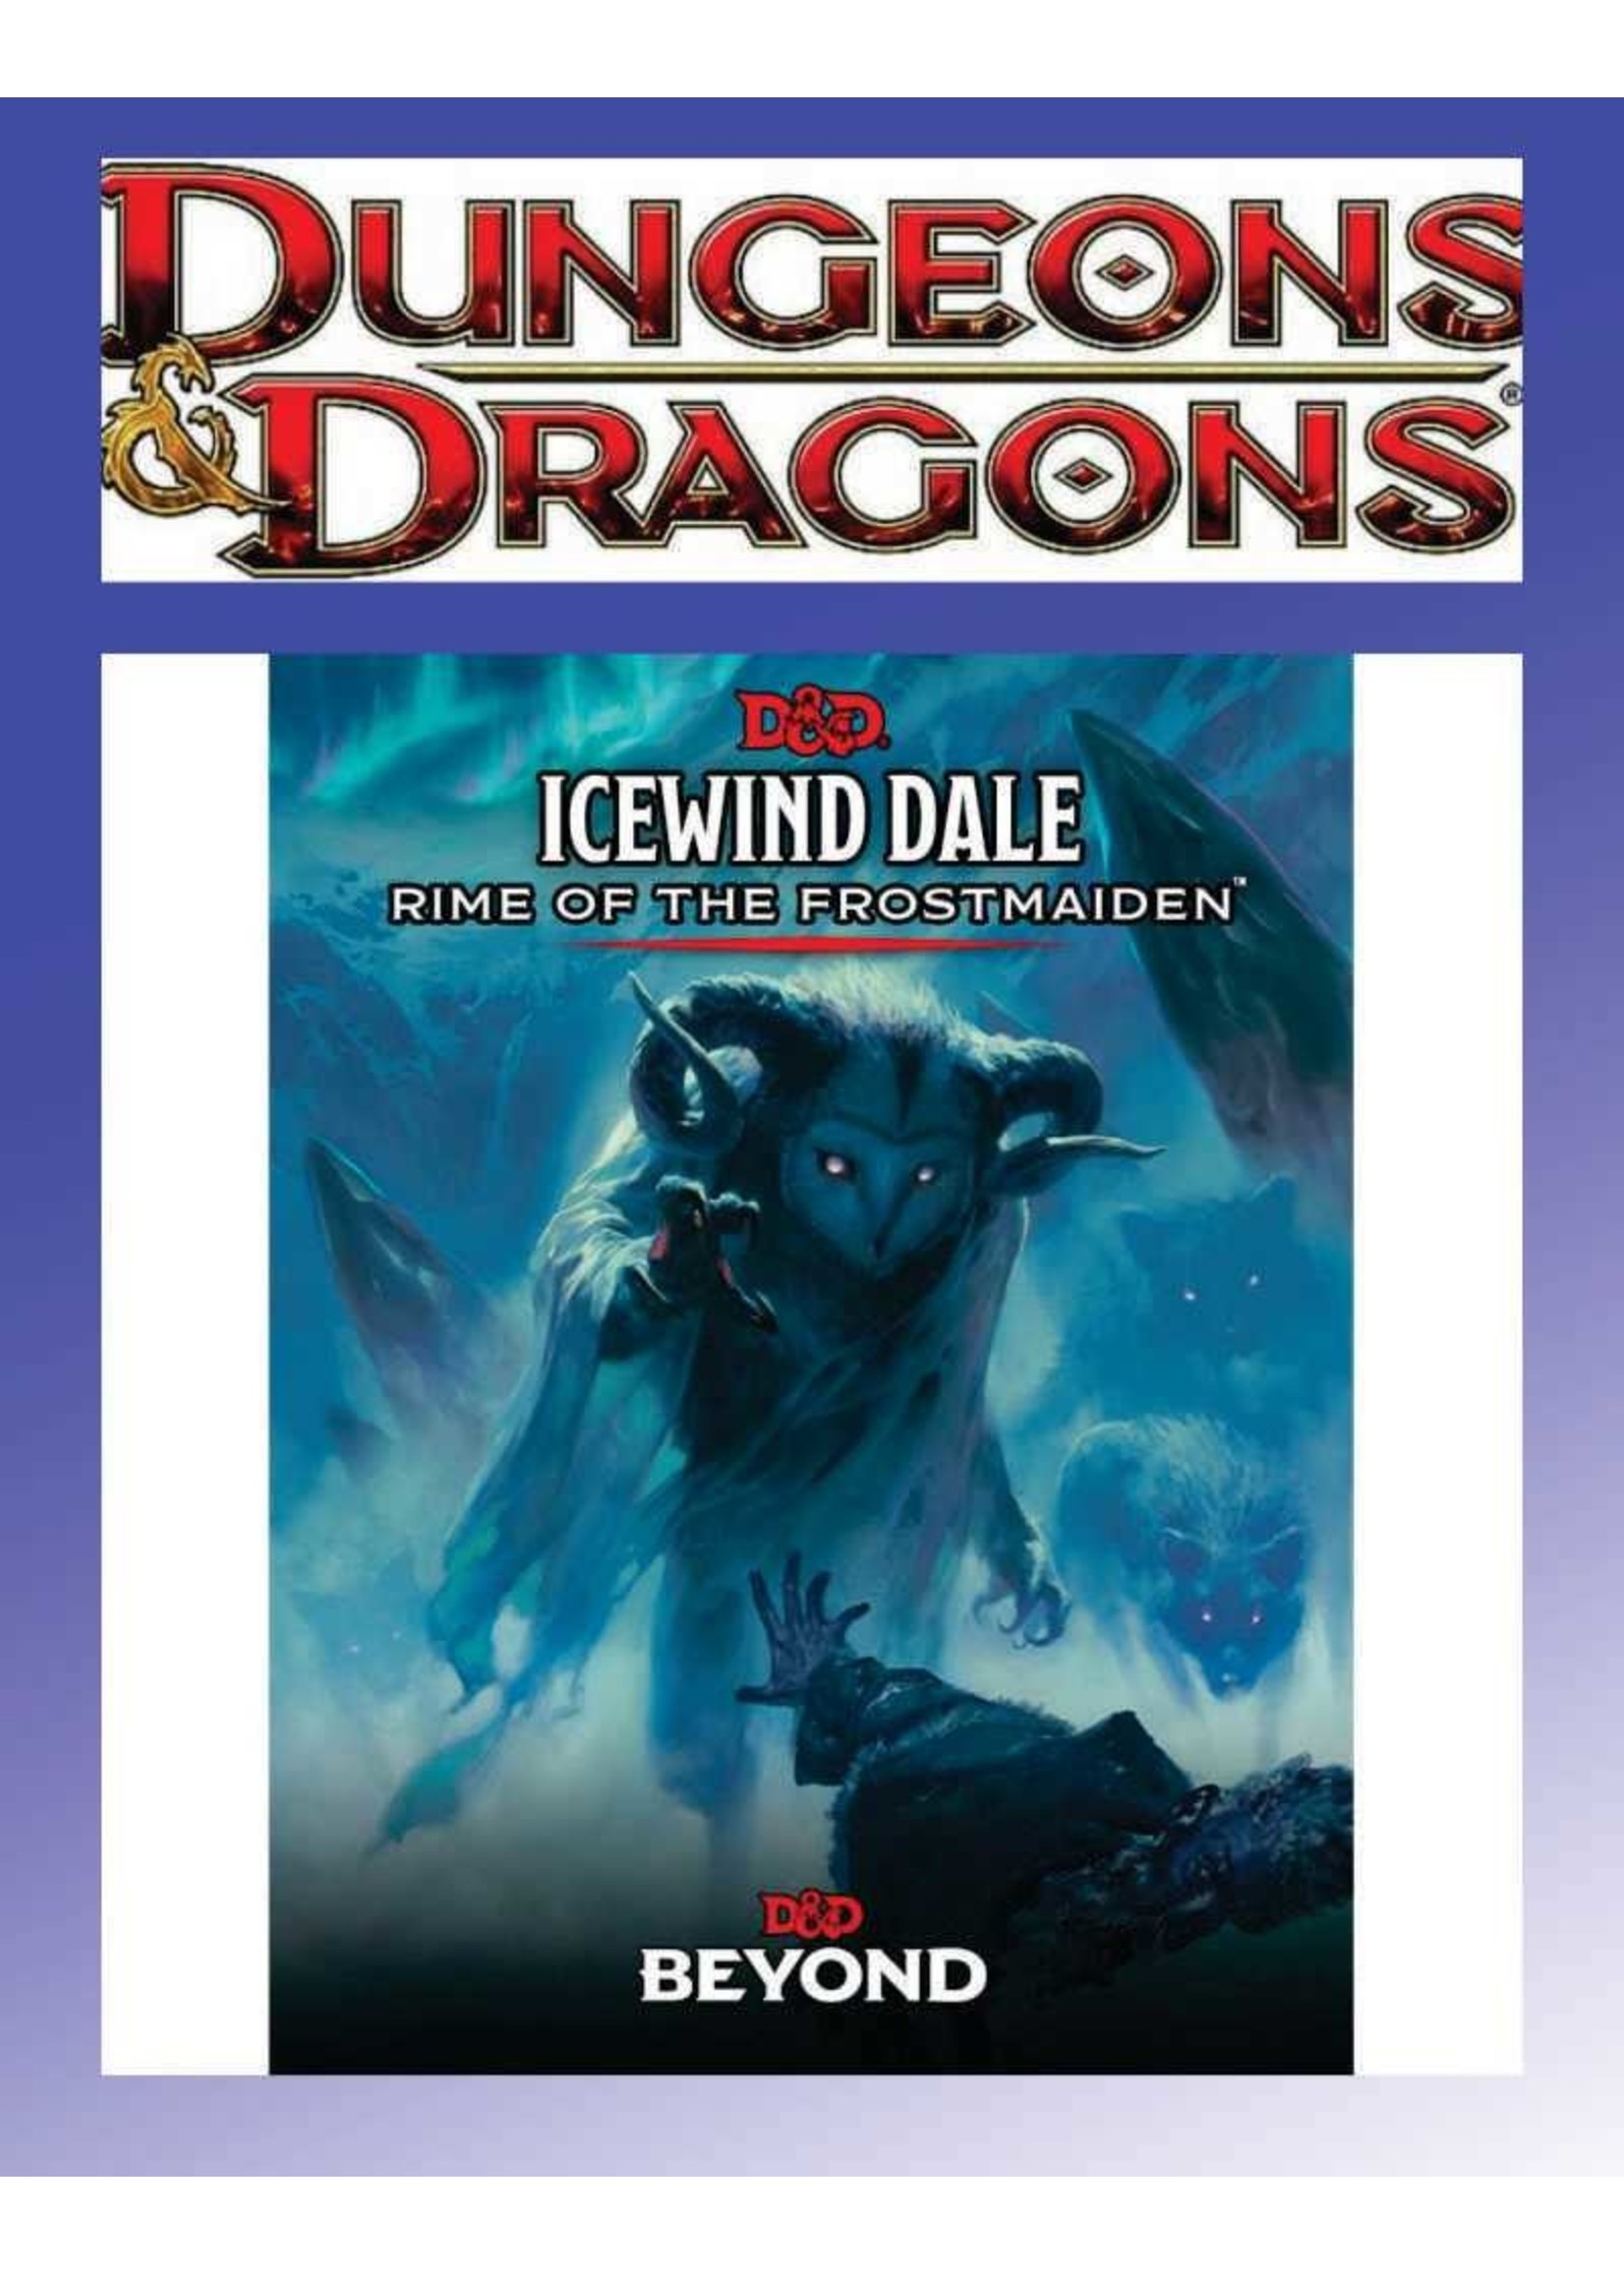 Dungeons and Dragons D&D 5E: Icewind Dale Rime of the Frostmaiden